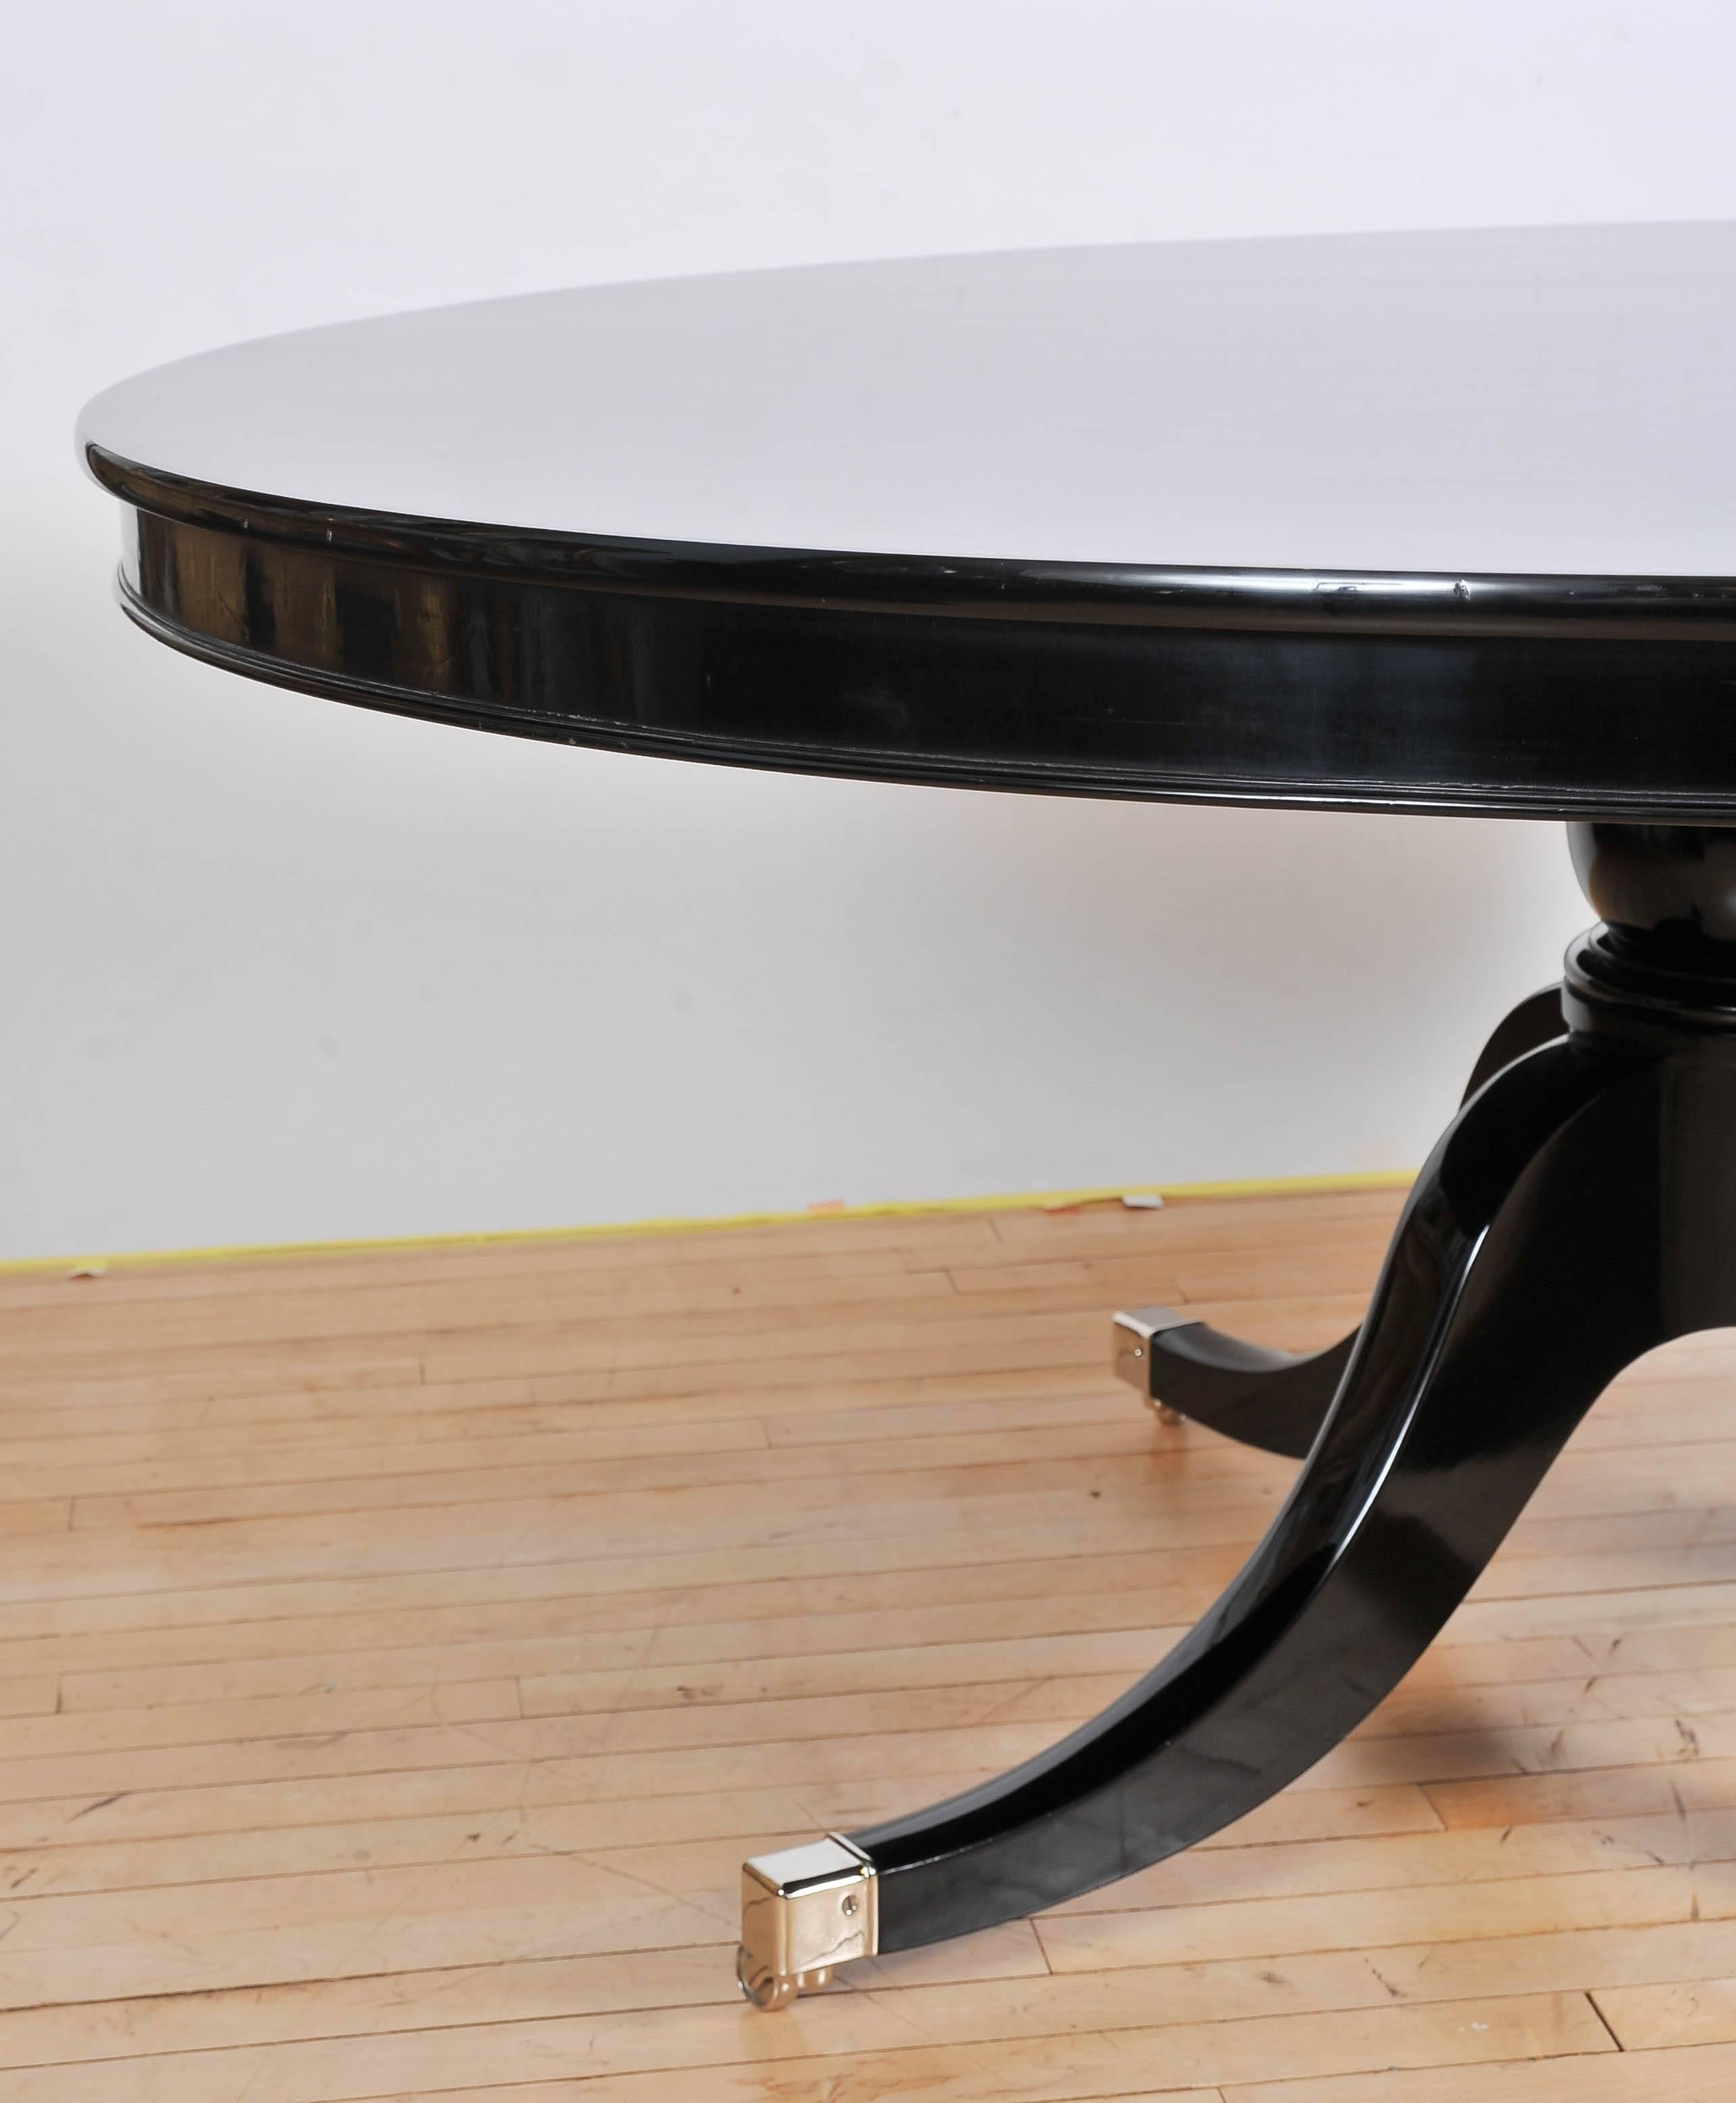 This marvellous and very appealing early 20th century mahogany breakfast table features an ebonized finish and is finished with square capped nickel-plated castors. The table is a well-proportioned size and is supported on a Quadraform base with